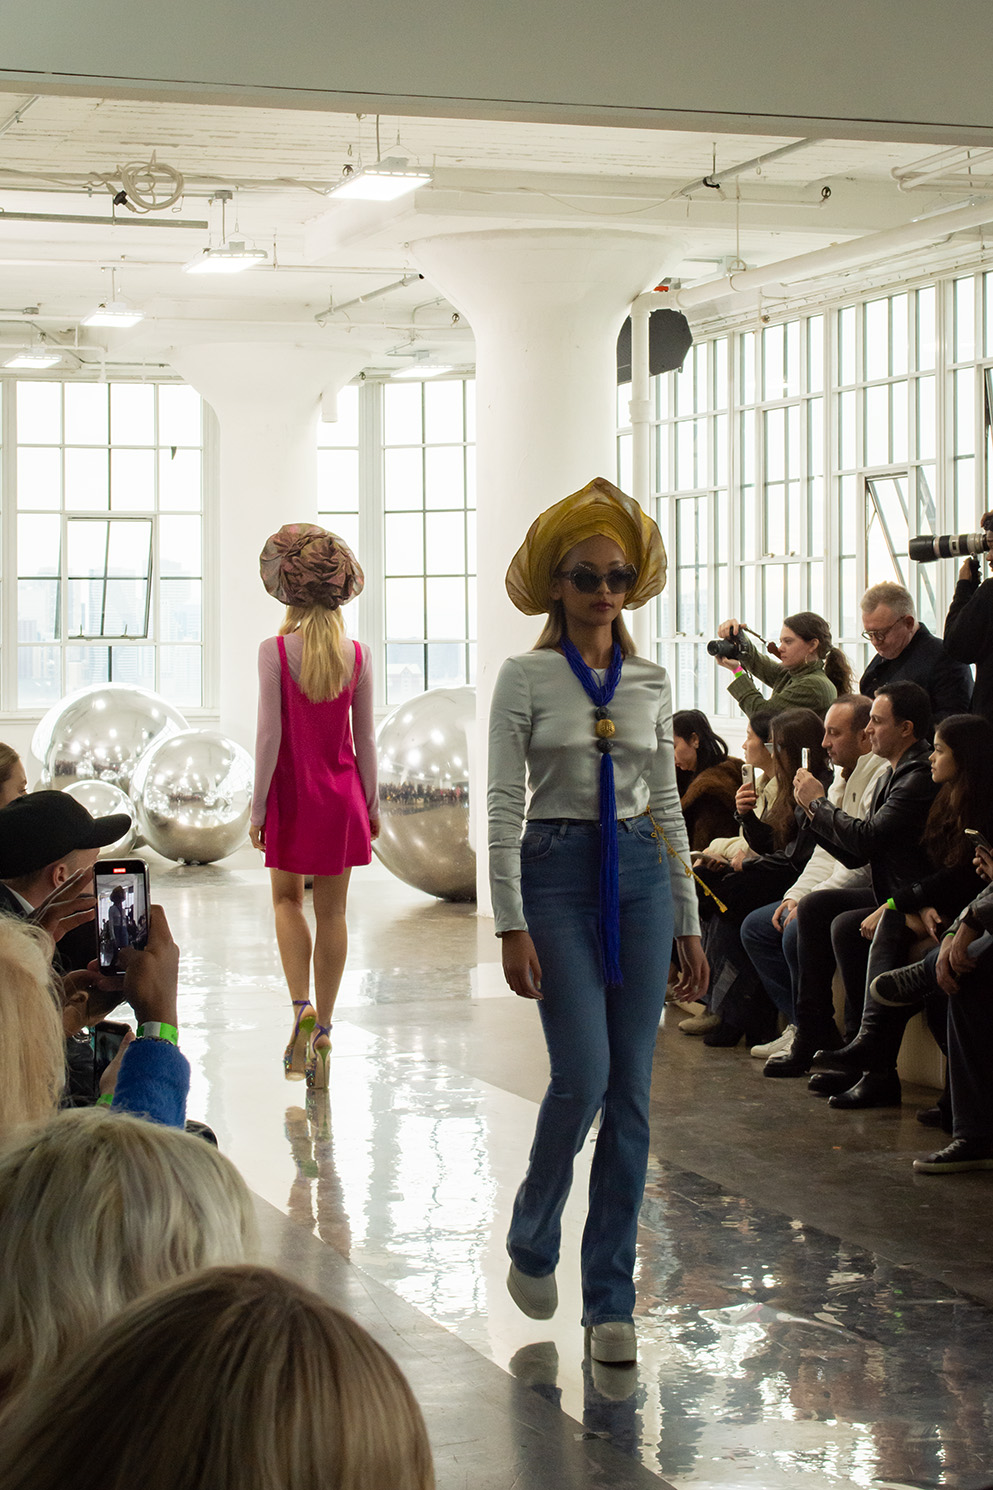 Two models walk, one going toward the back, wearing a hot pink, satin dress with a hat,and the other wearing a satin, long-sleeved top, jeans, a yellow hat and a blue necklace with a gold bead in the center.